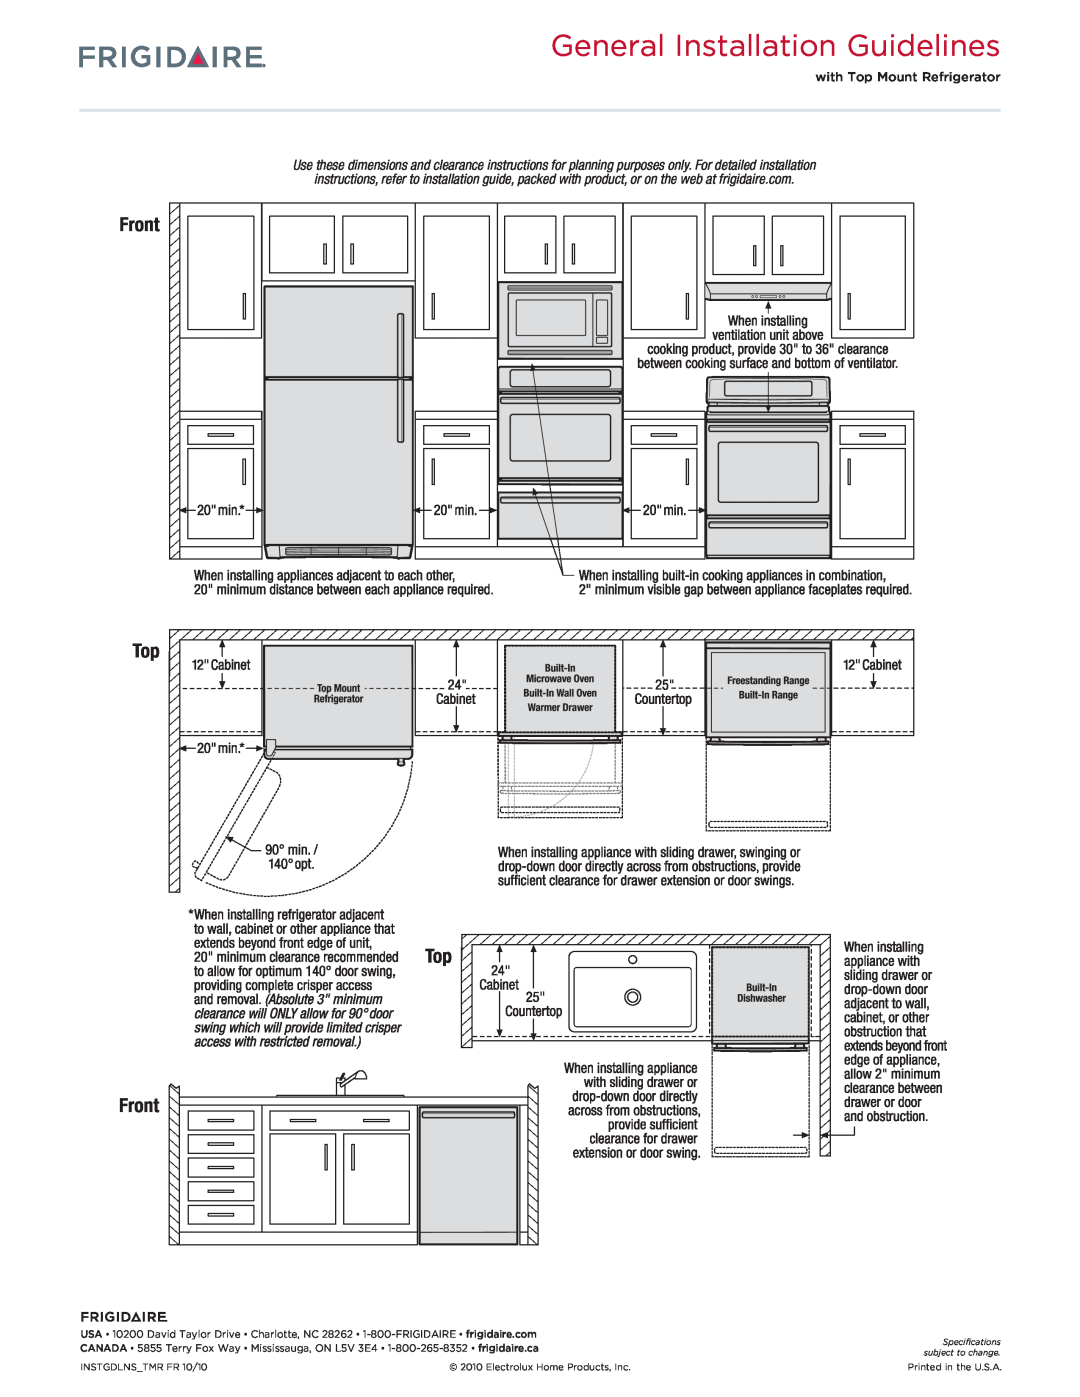 Frigidaire FFEF3048L S General Installation Guidelines, Top Front, with Top Mount Refrigerator, INSTGDLNS TMR FR 10/10 